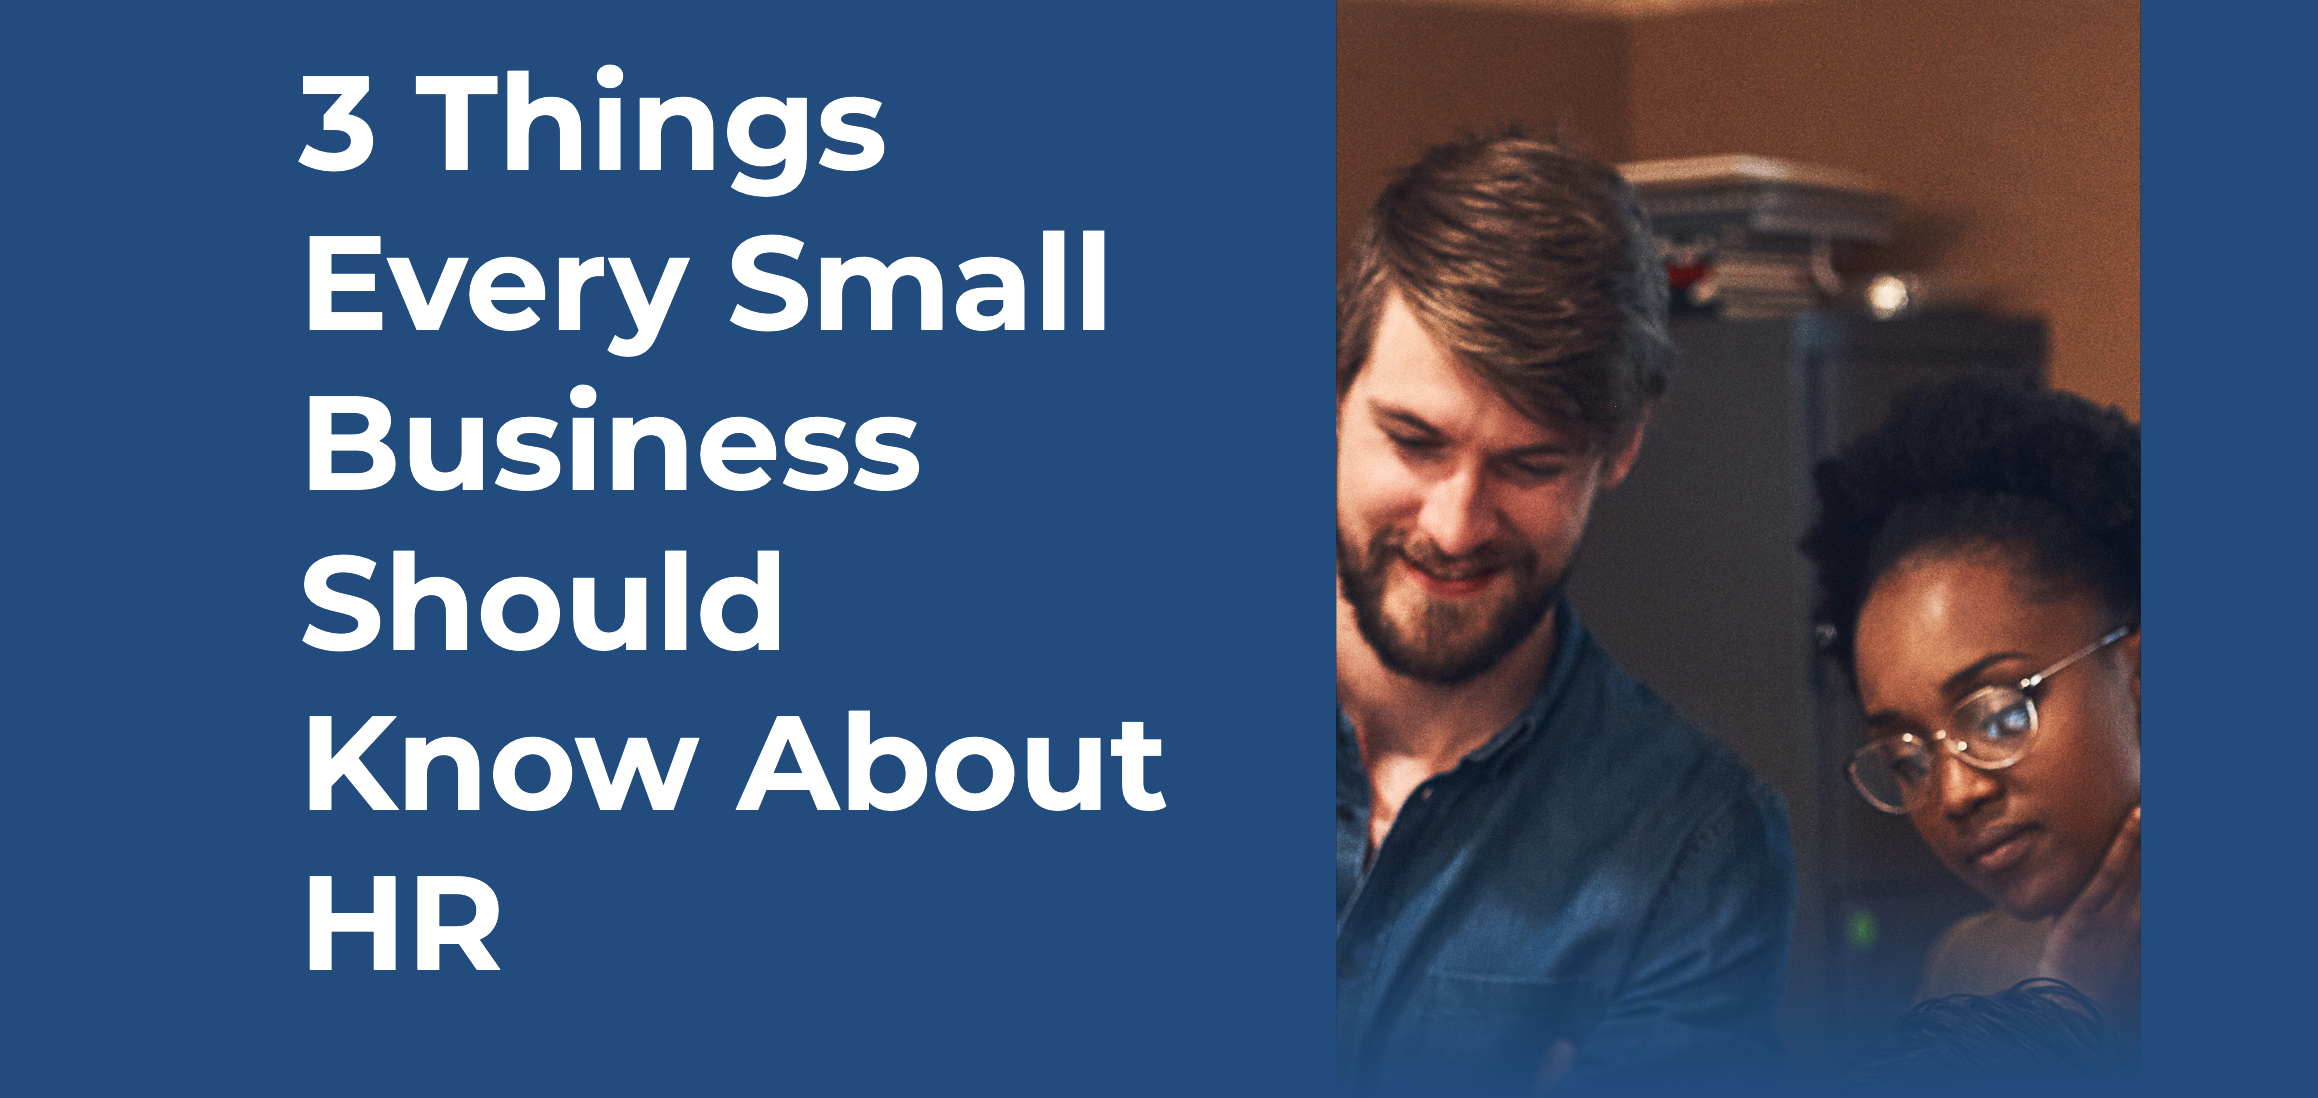 3 Things Every Small Business Should Know About HR